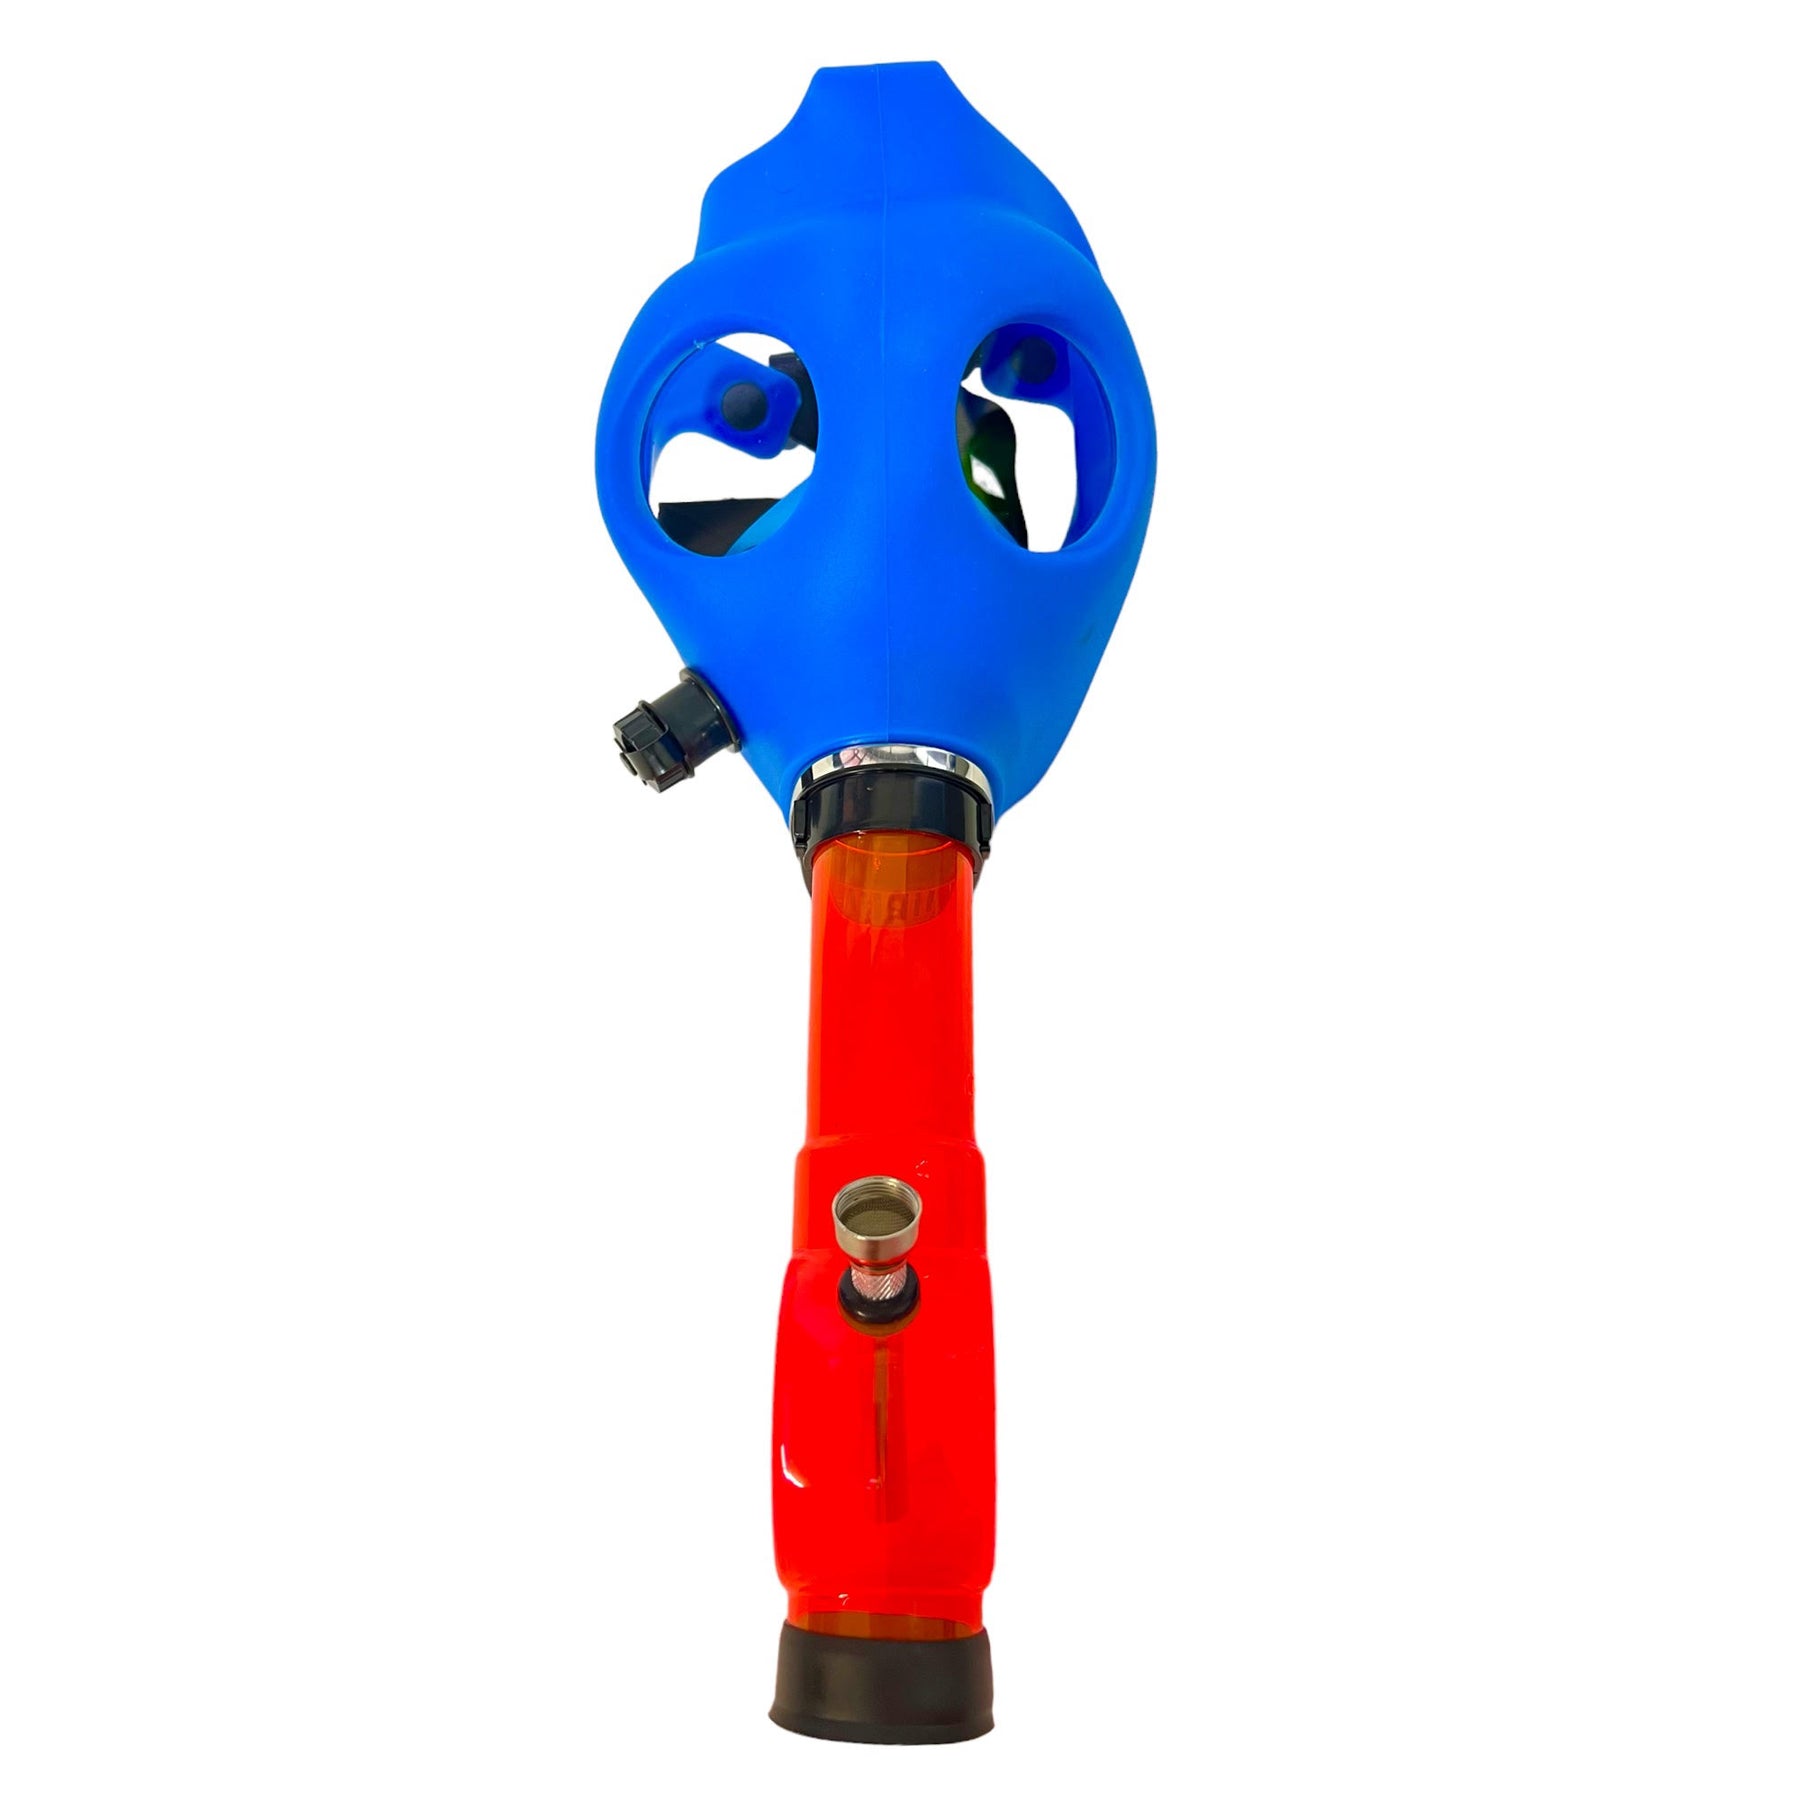 Acrylic Bong Gas Mask for Weed Light Blue